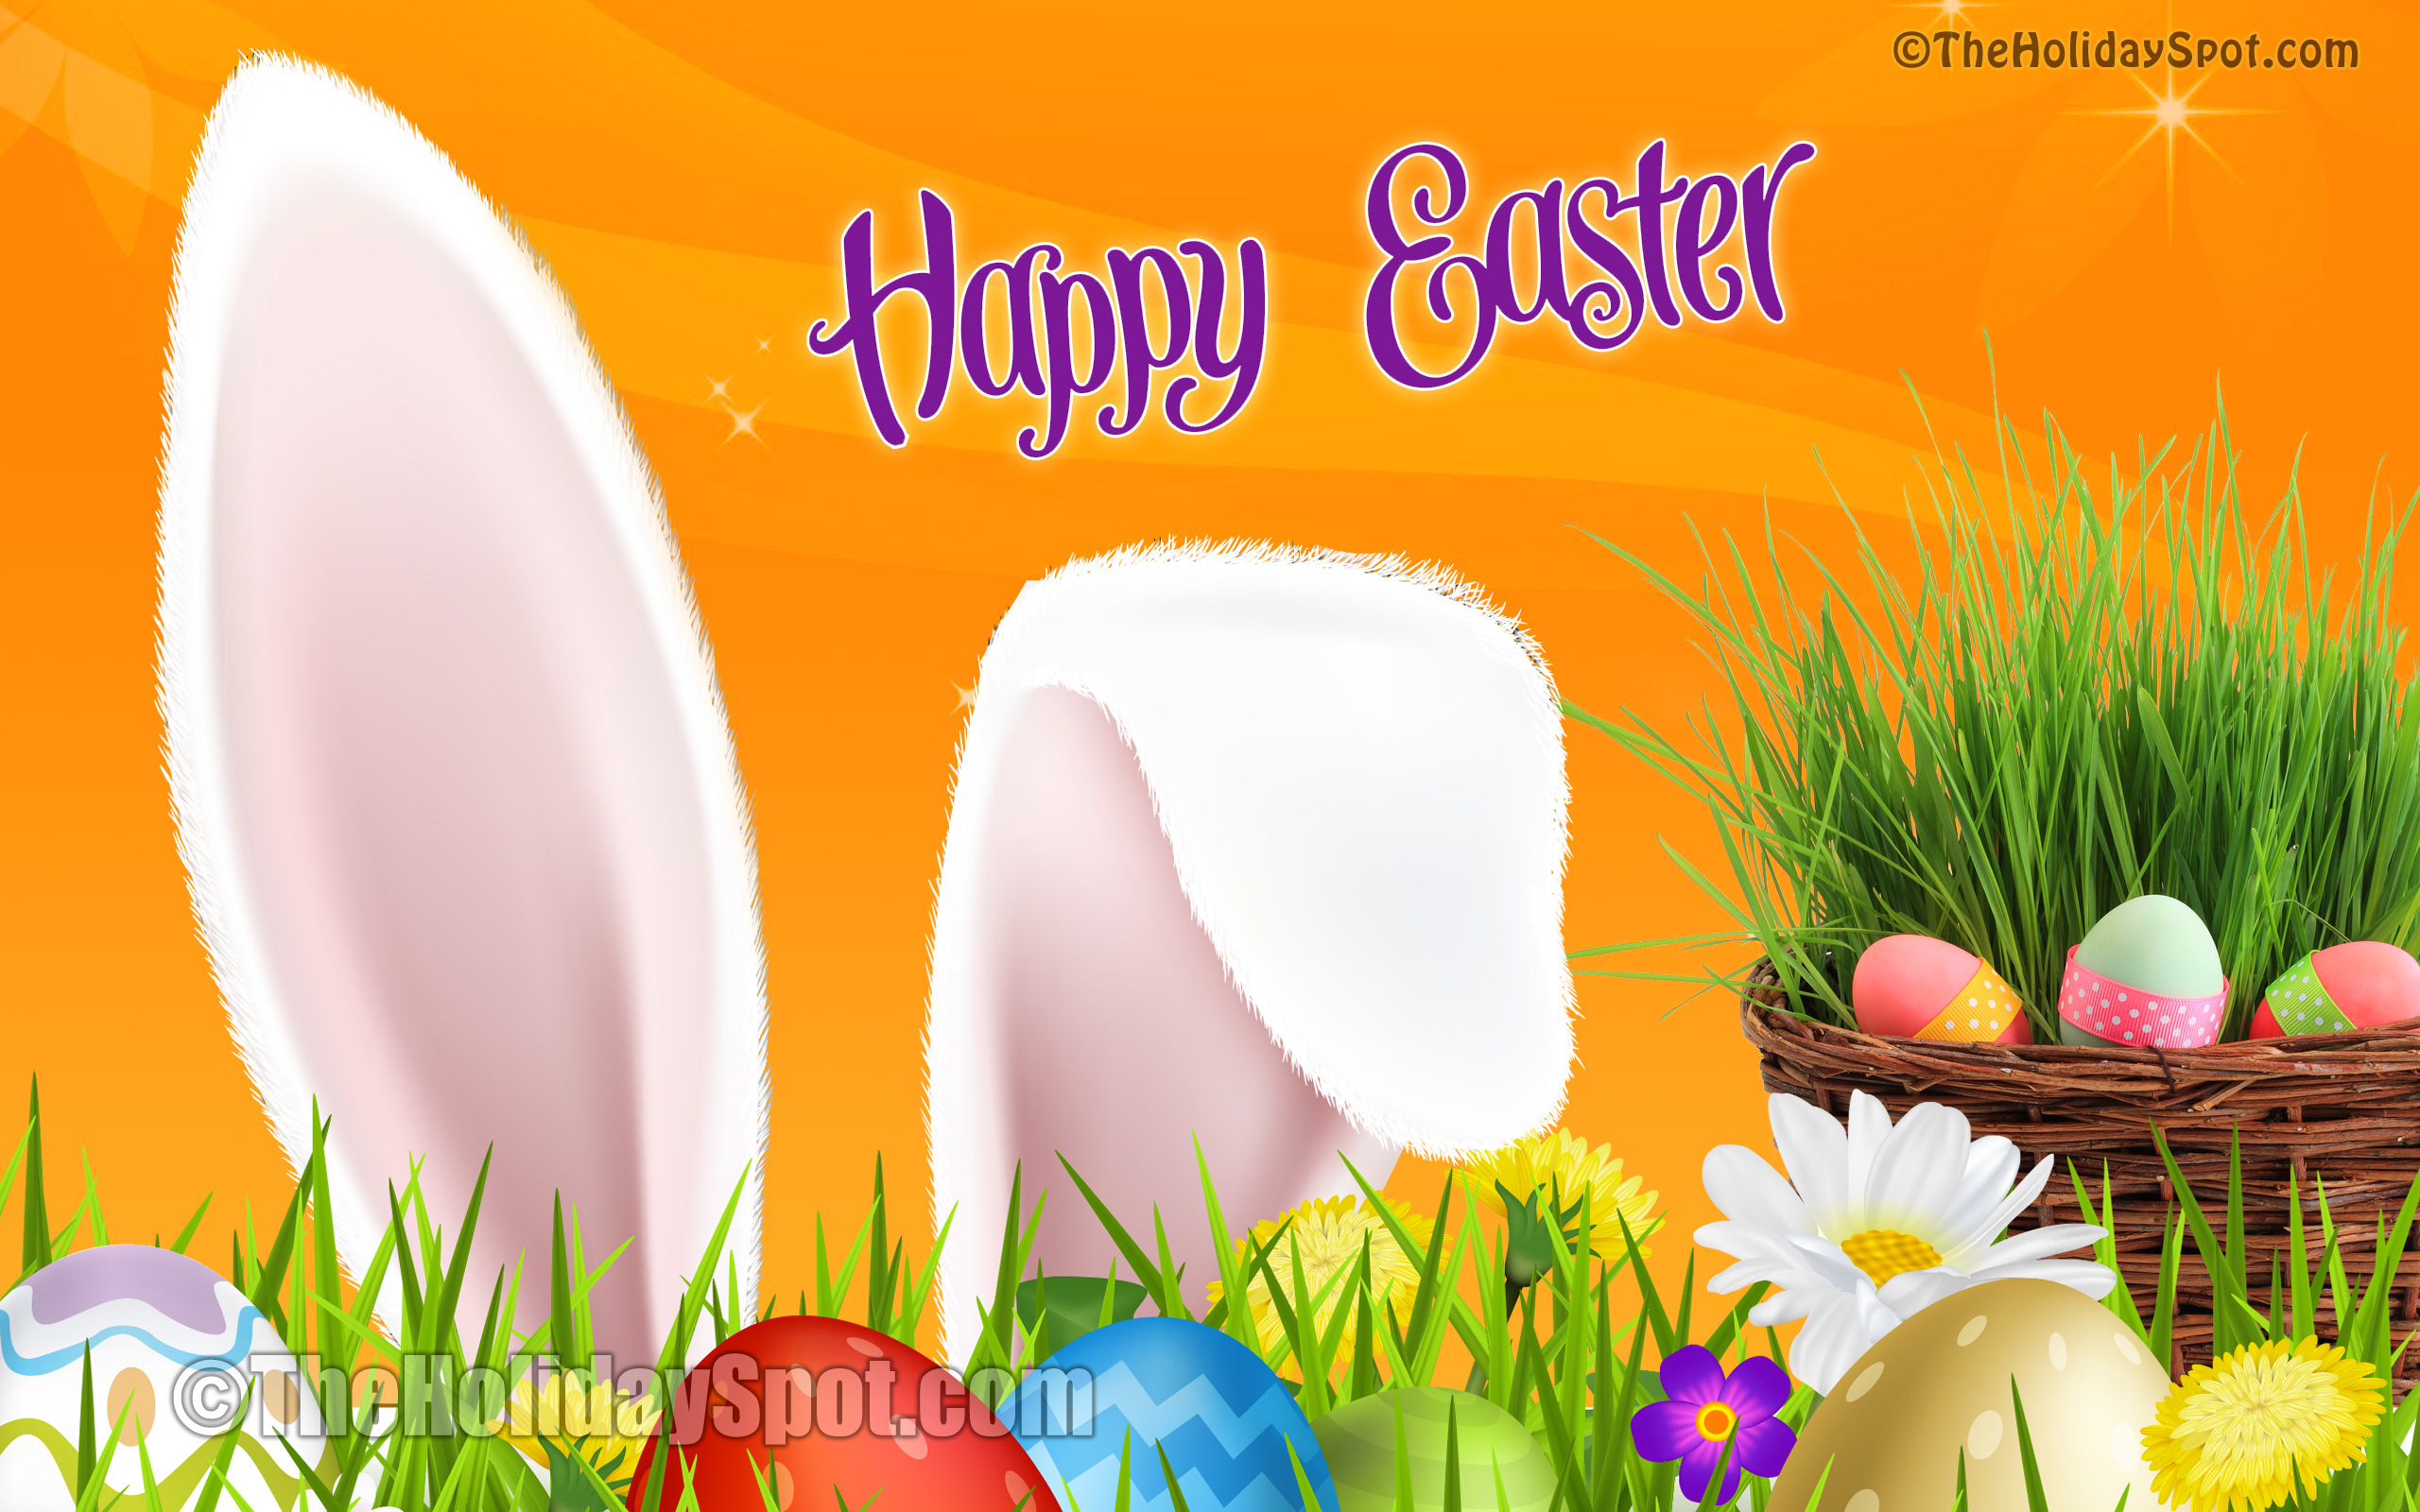 Hd Colorful Wallpaper With Easter Wishes - Cute Wallpaper Easter - HD Wallpaper 